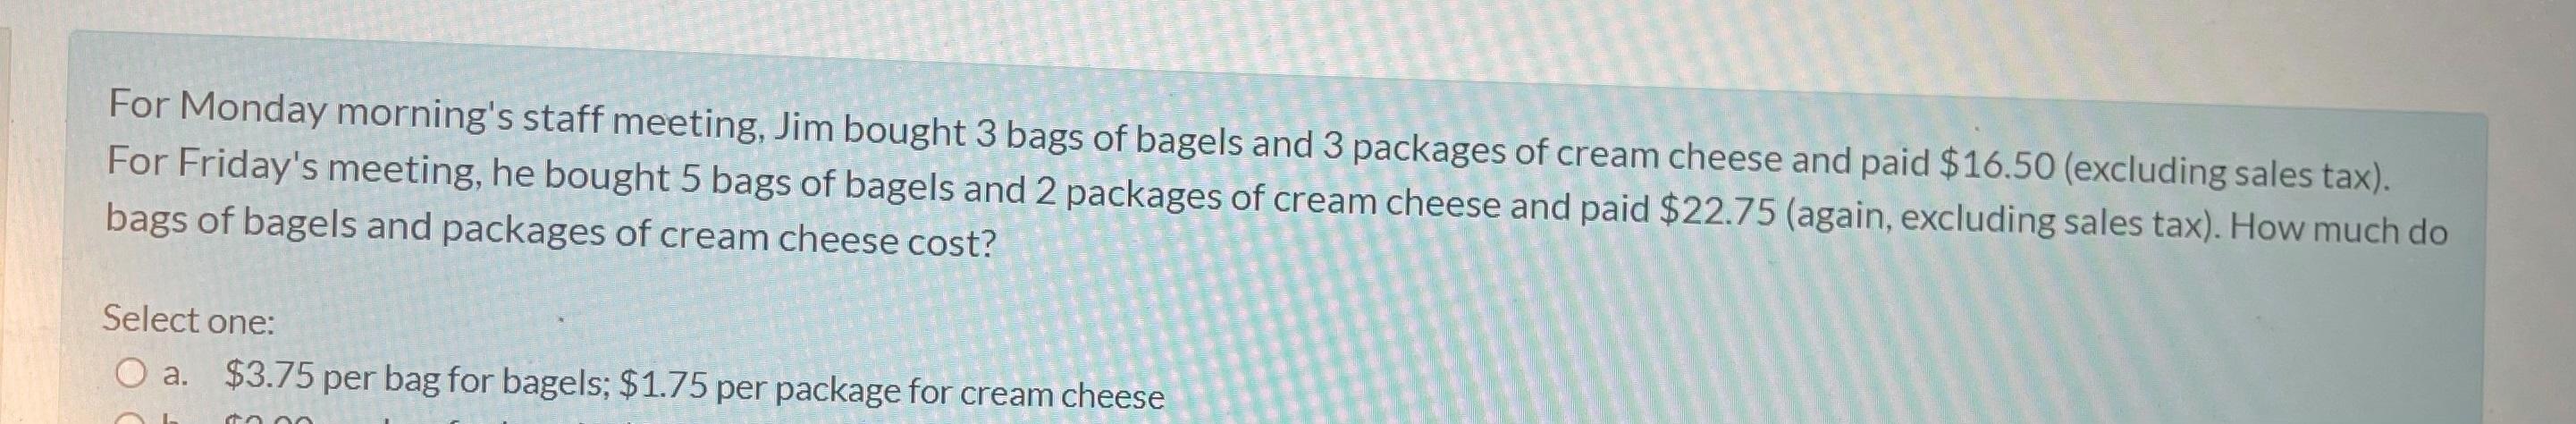 For Monday Morning's Staff Meeting, Jim Bought 3 Bags Of Bagels And 3 Packages Of Cream Cheese And Paid